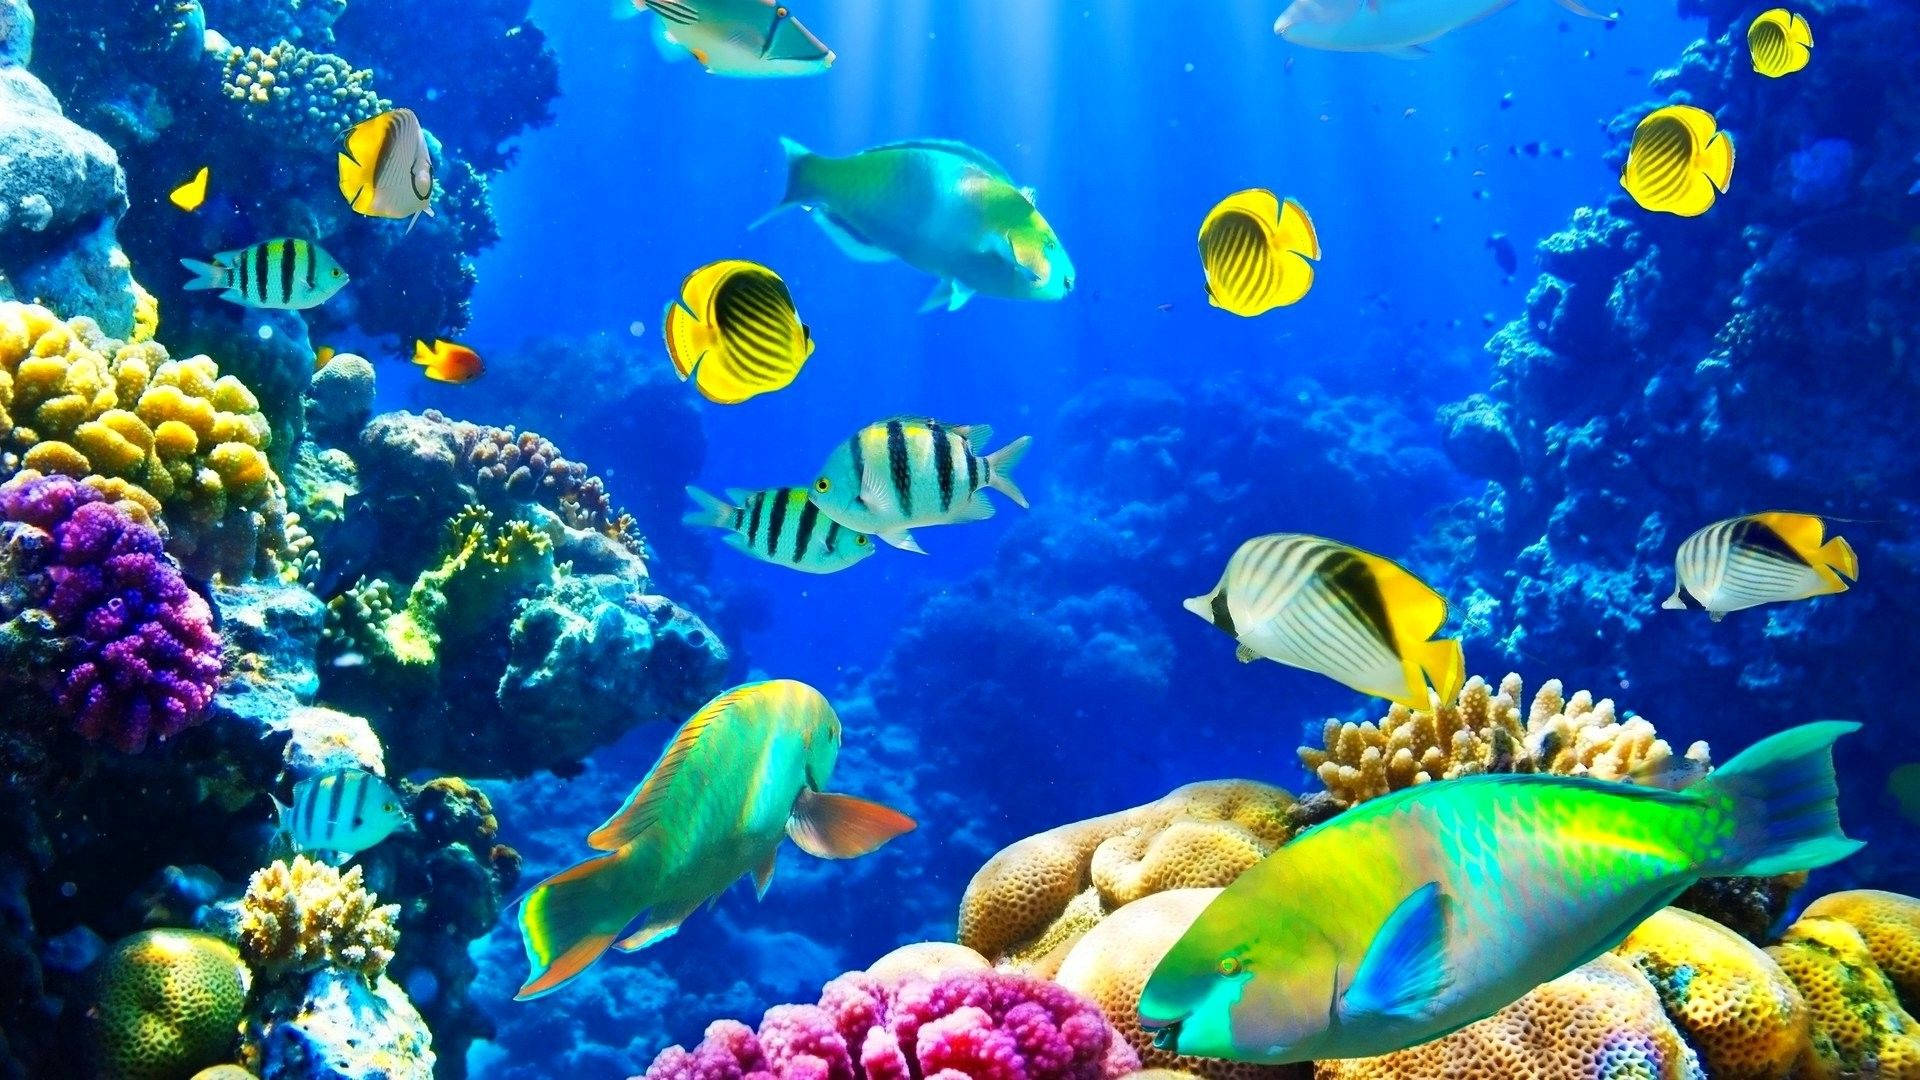 Exploring the colourful world of nature under the sea Wallpaper